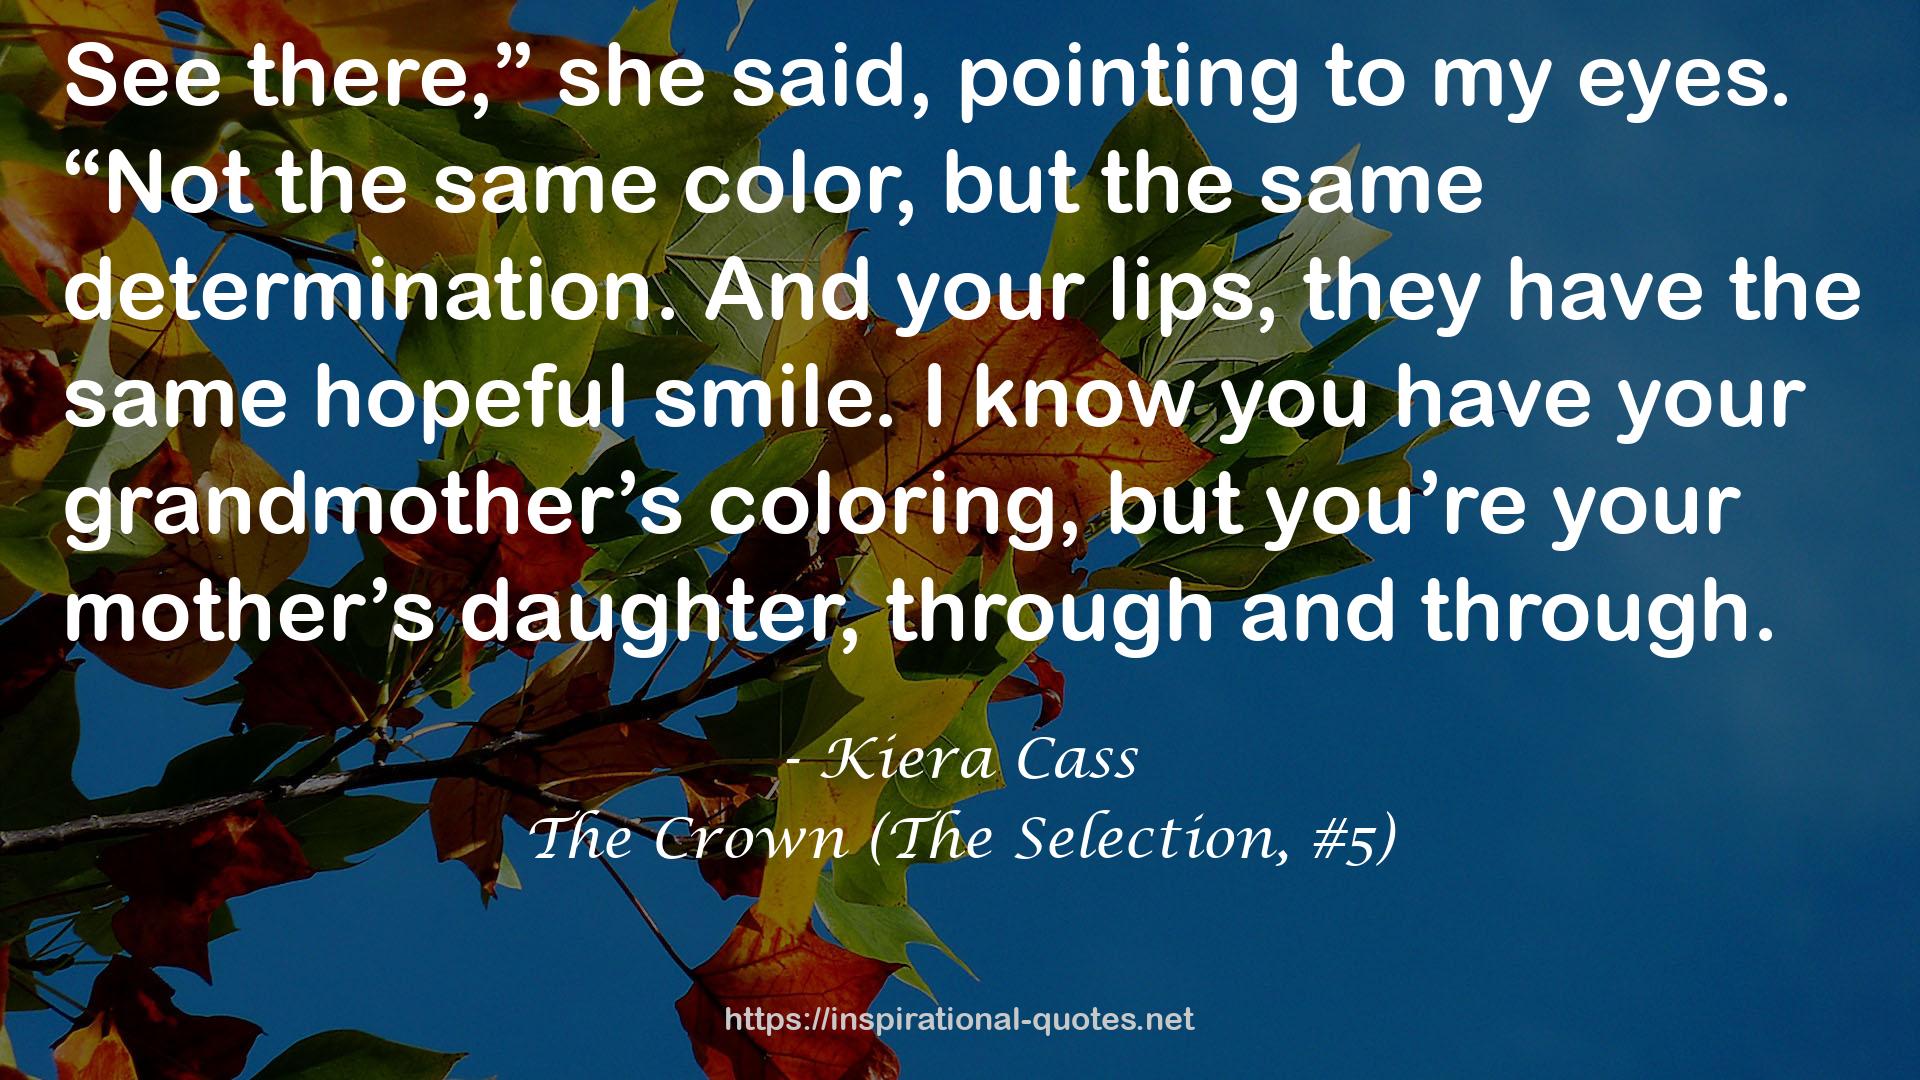 The Crown (The Selection, #5) QUOTES